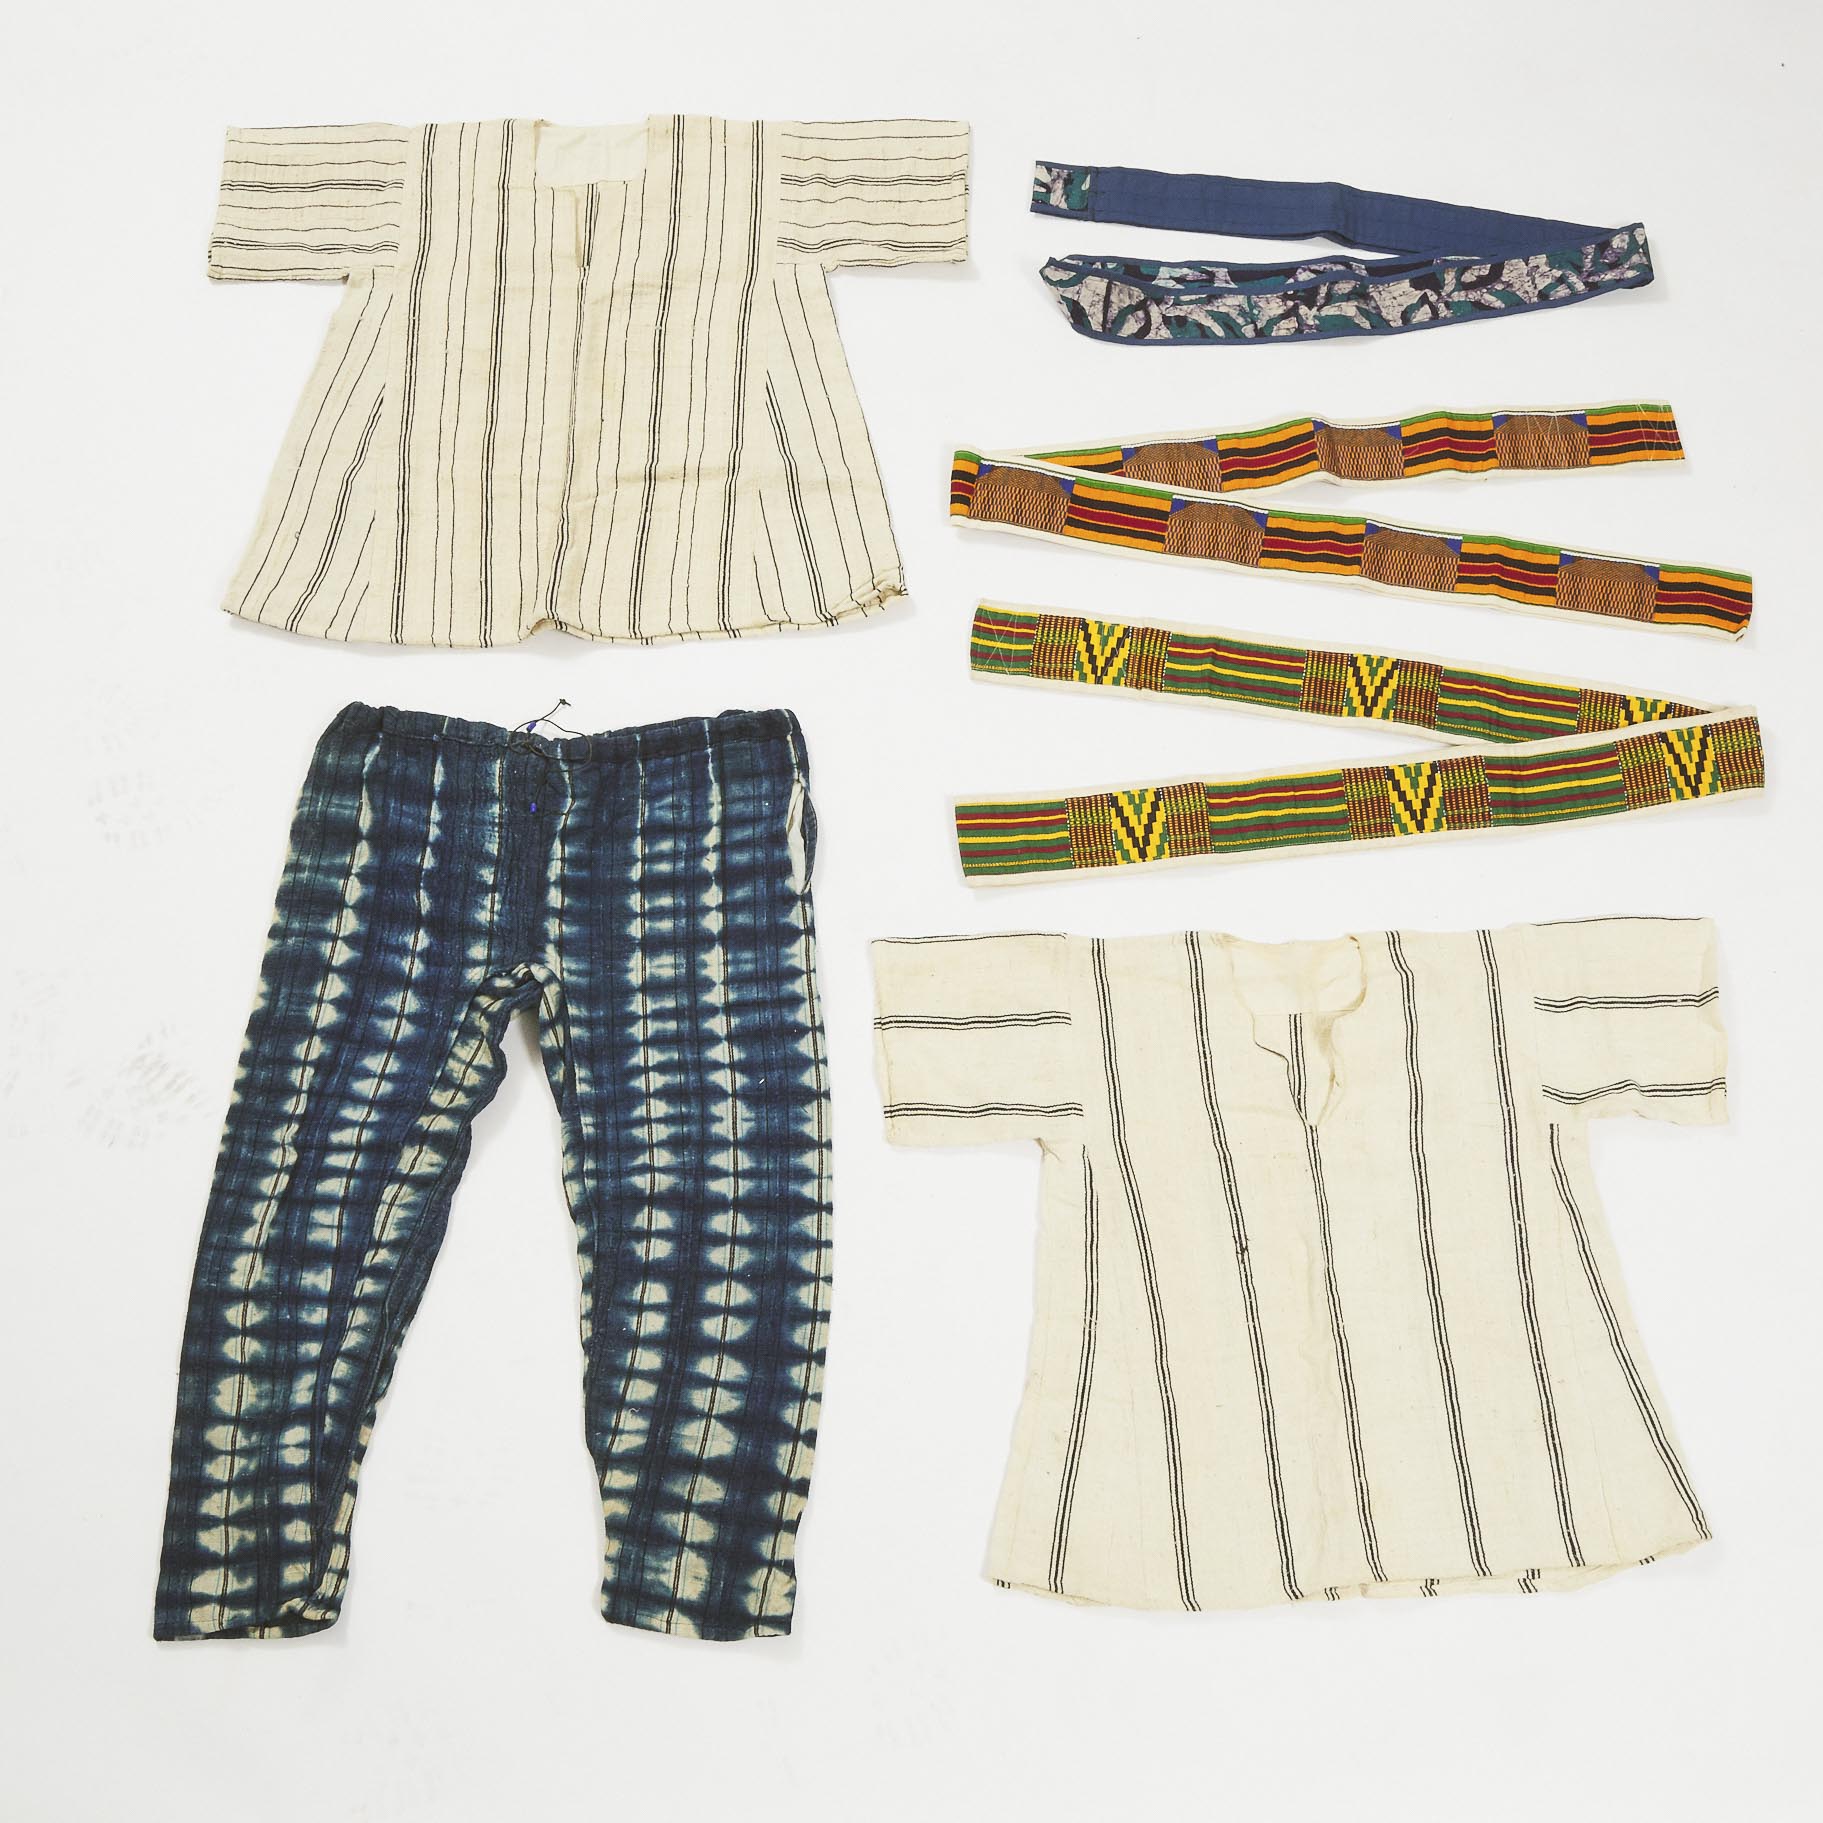 Group of Six African Textiles including two shirts, pair of pants, two Kente cloth sashes together with a dyed sash